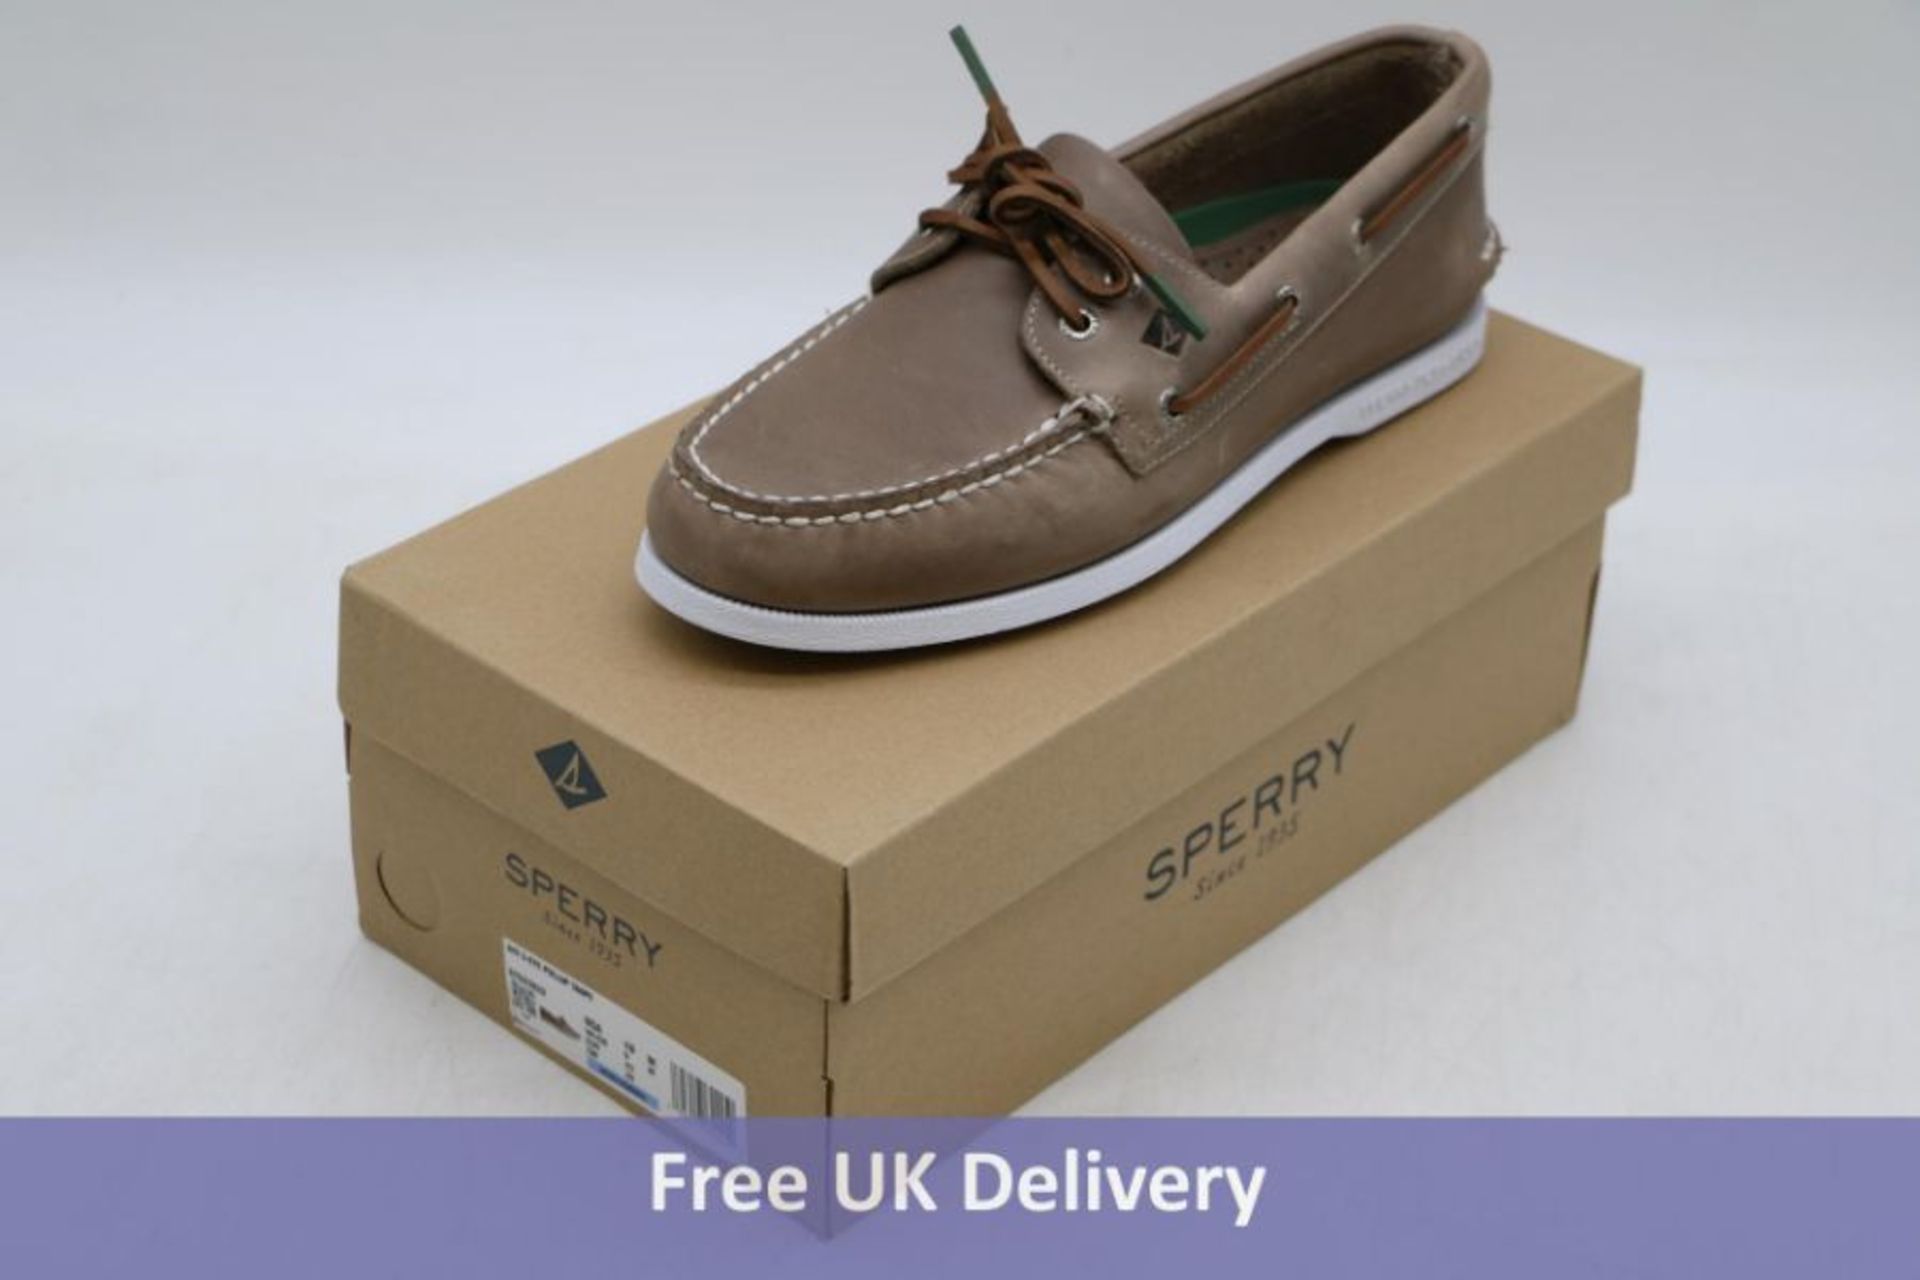 Sperry Men's 2 Eye Pullup Boat Shoes Taupe, UK 10